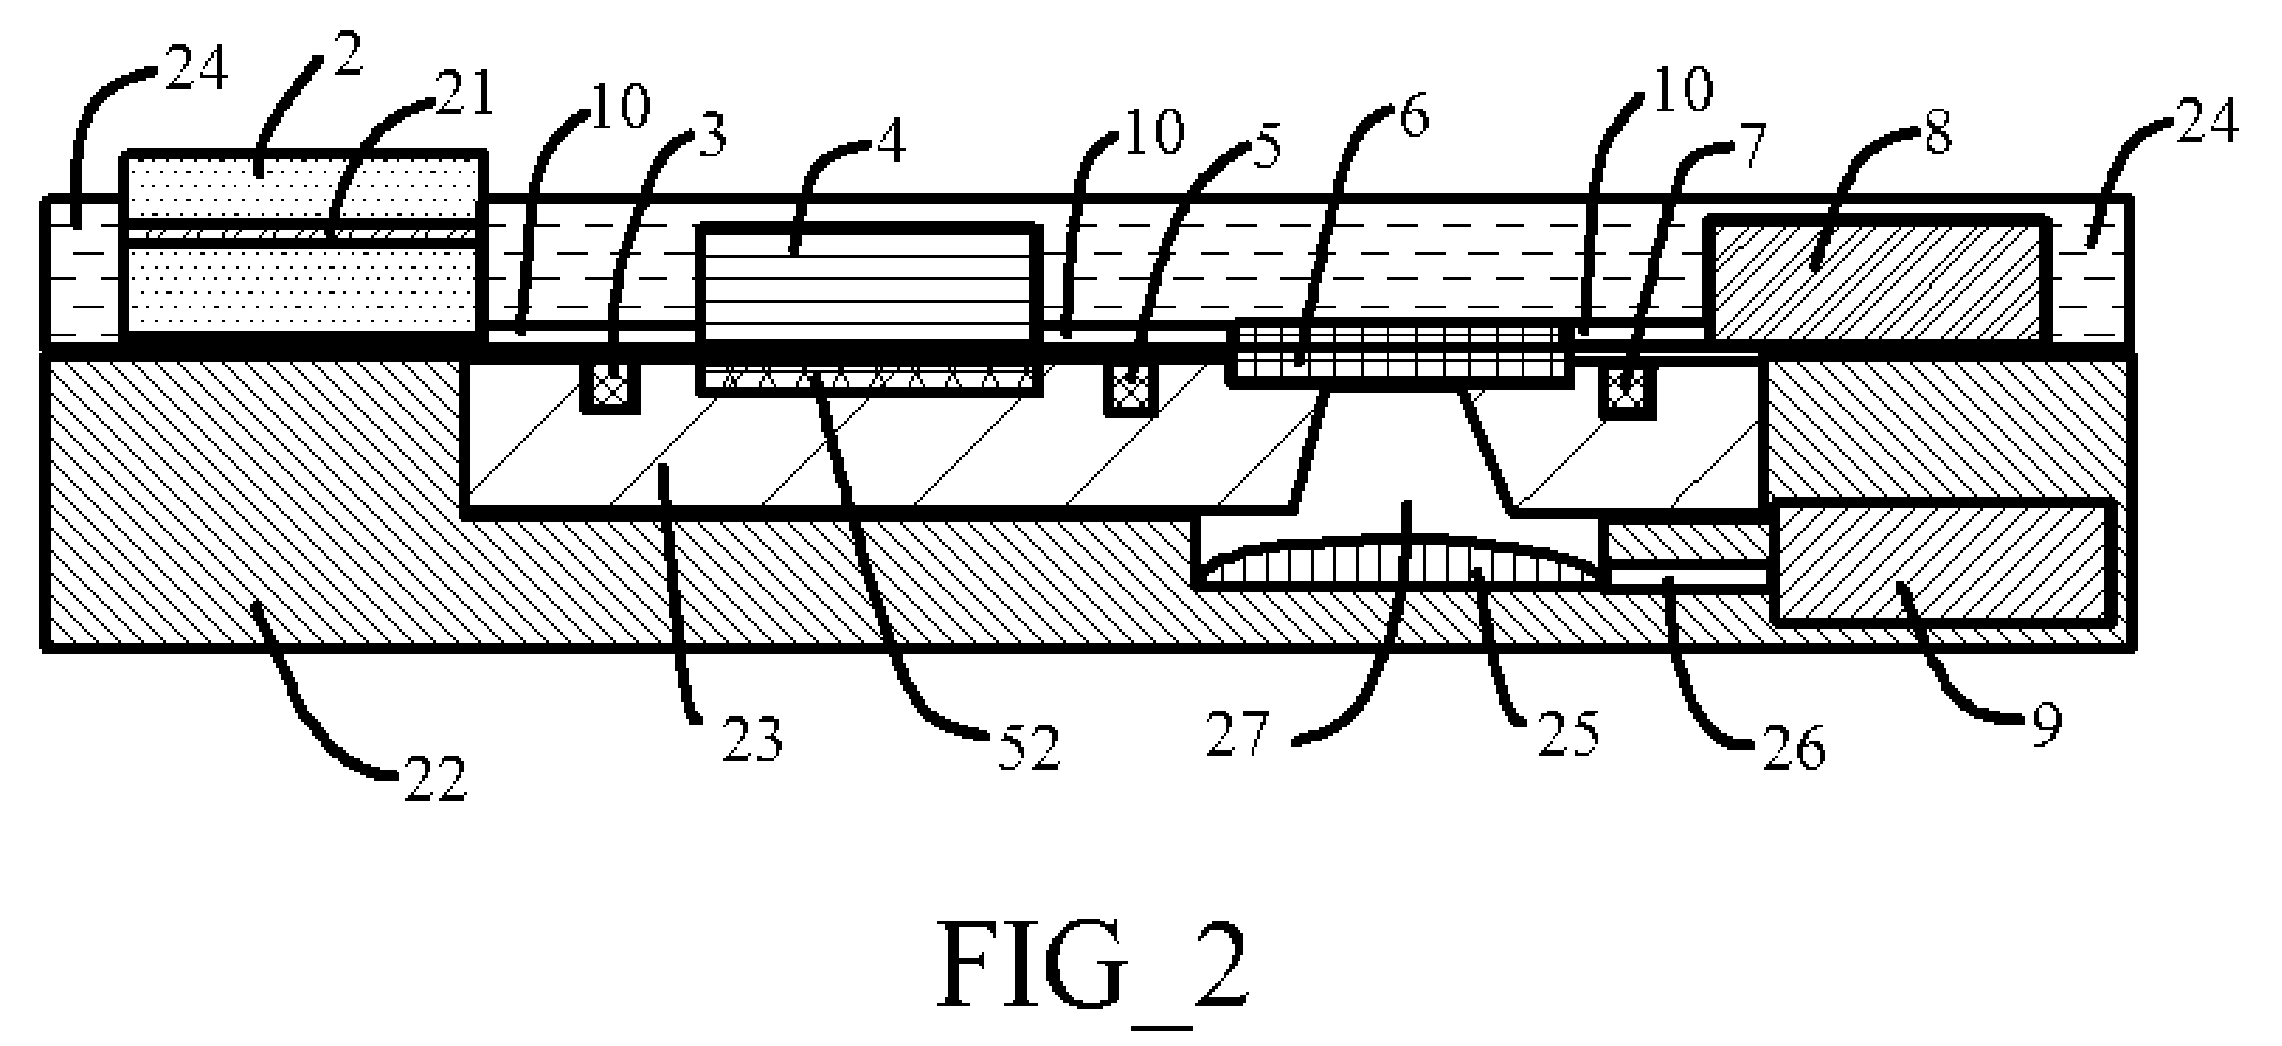 Micromachined Diagnostic Device with Controlled Flow of Fluid and Reaction